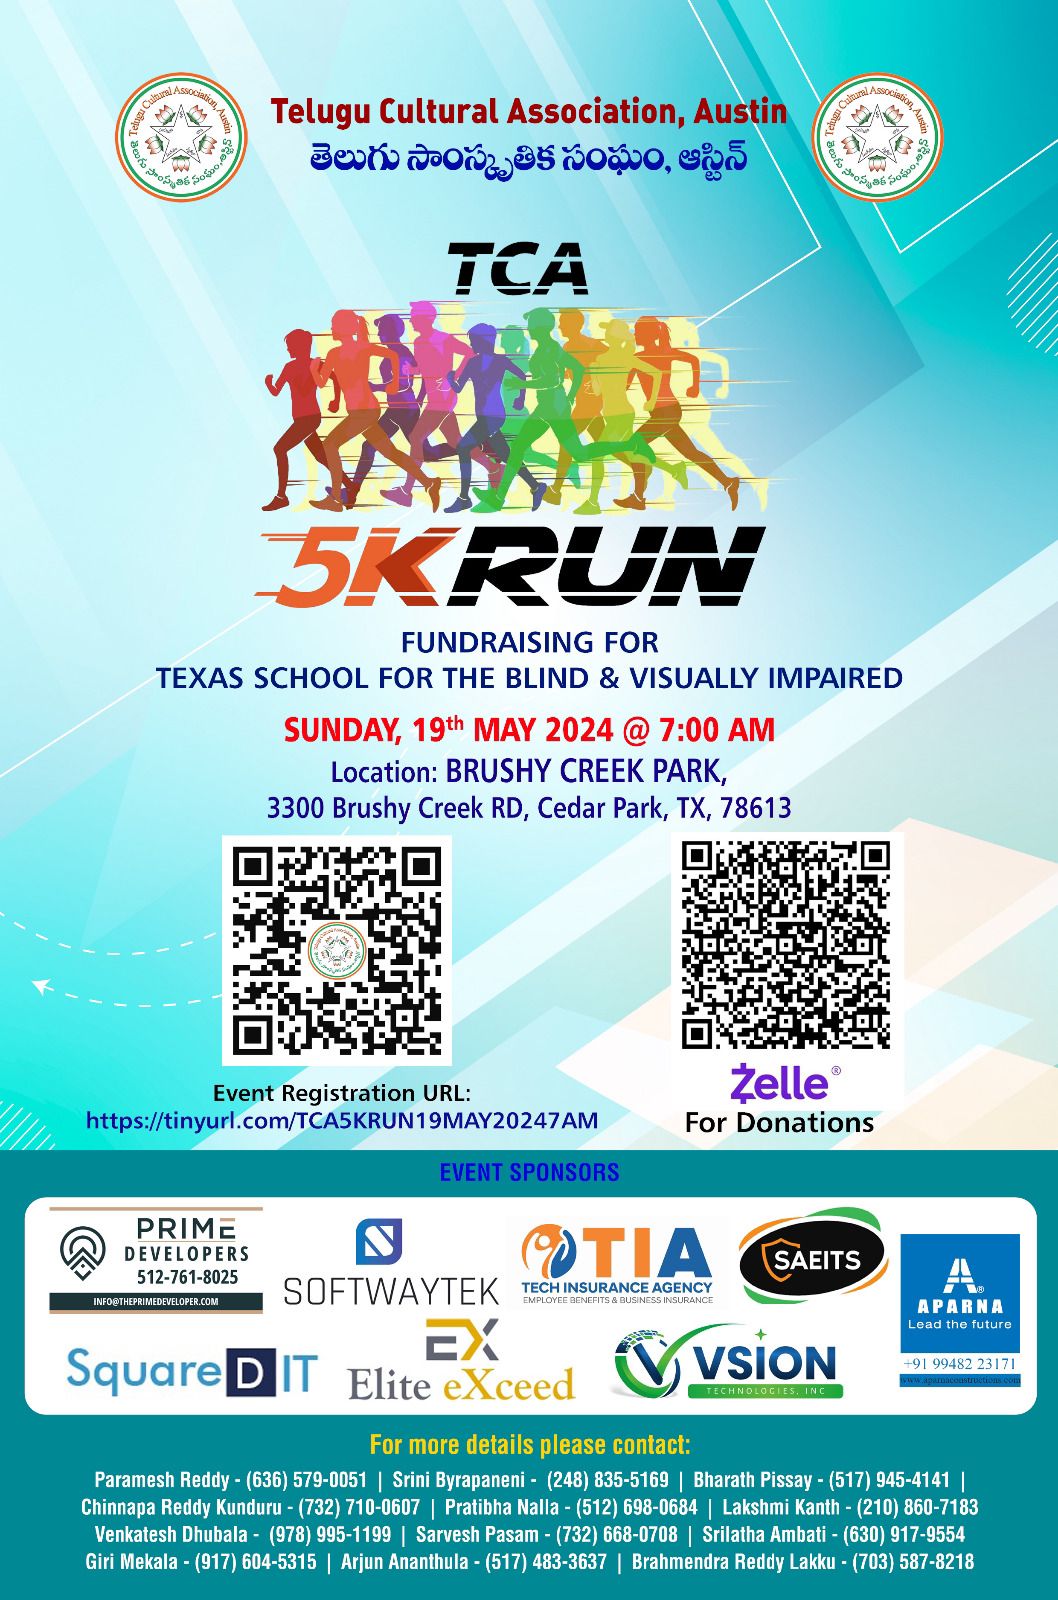 TCA 5K Run: Fundraising for Texas School for the Blind & Visually Impaired